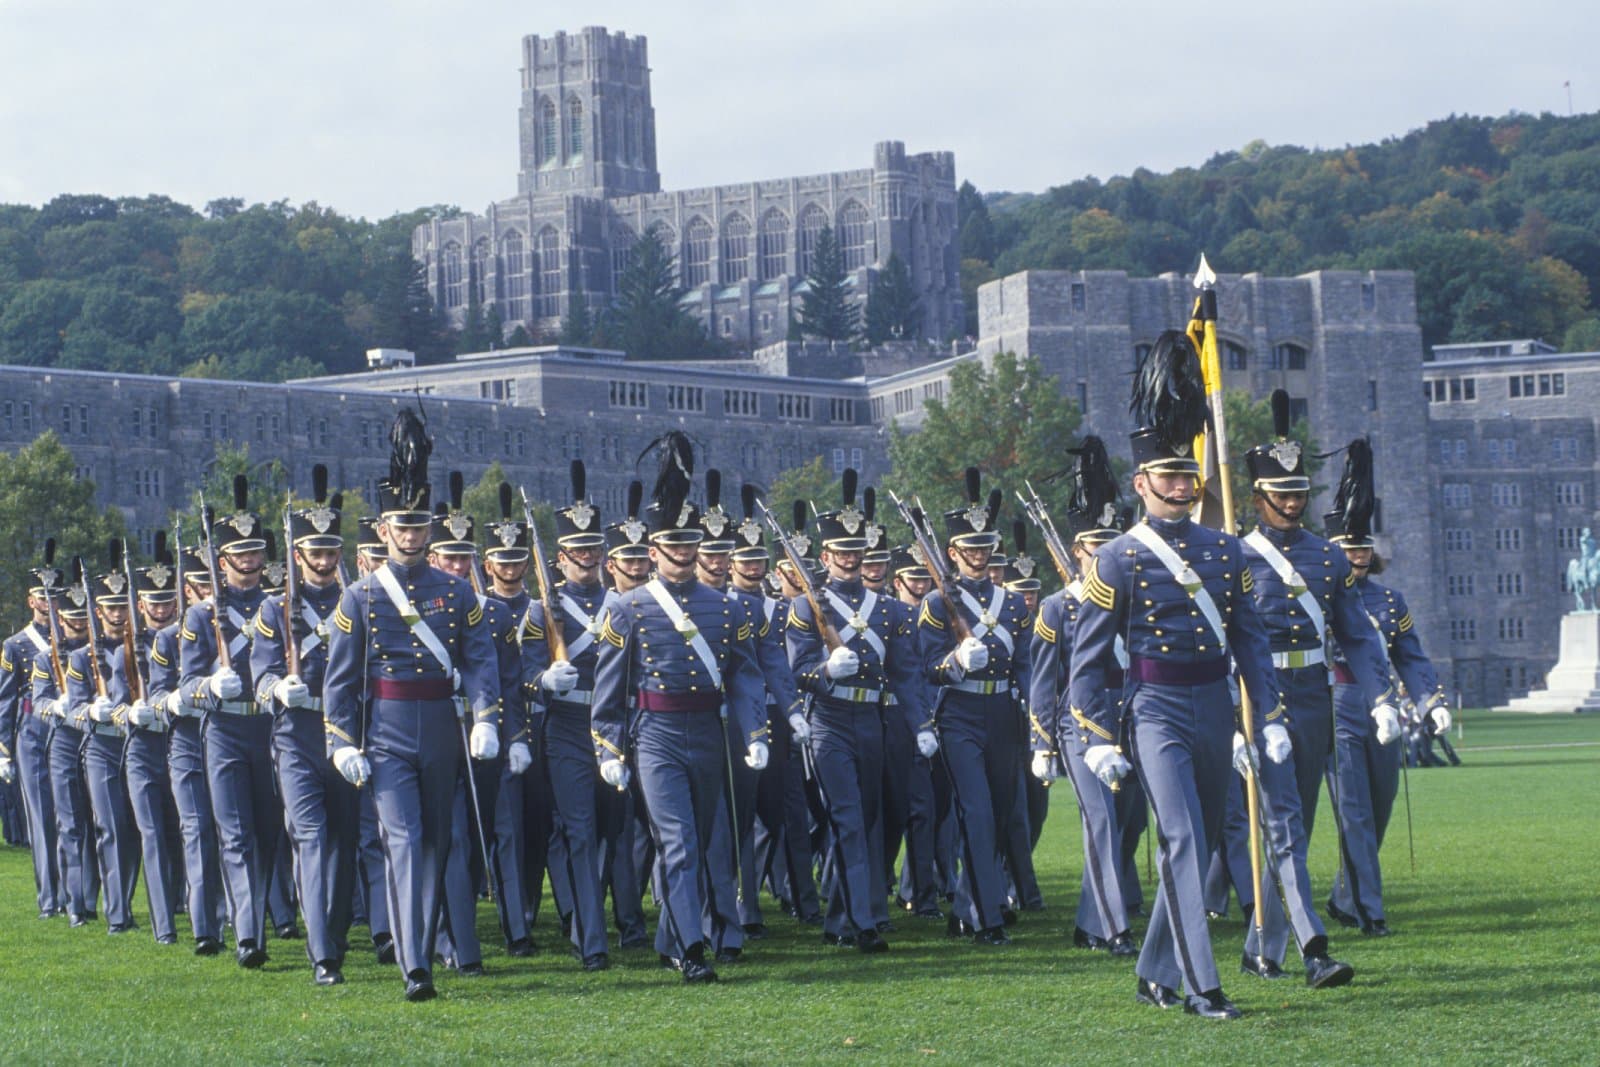 <p class="wp-caption-text">Image Credit: Shutterstock / Joseph Sohm</p>  <p>One of the oldest military institutions in America, West Point continues to be a key training ground for Army leaders.</p>